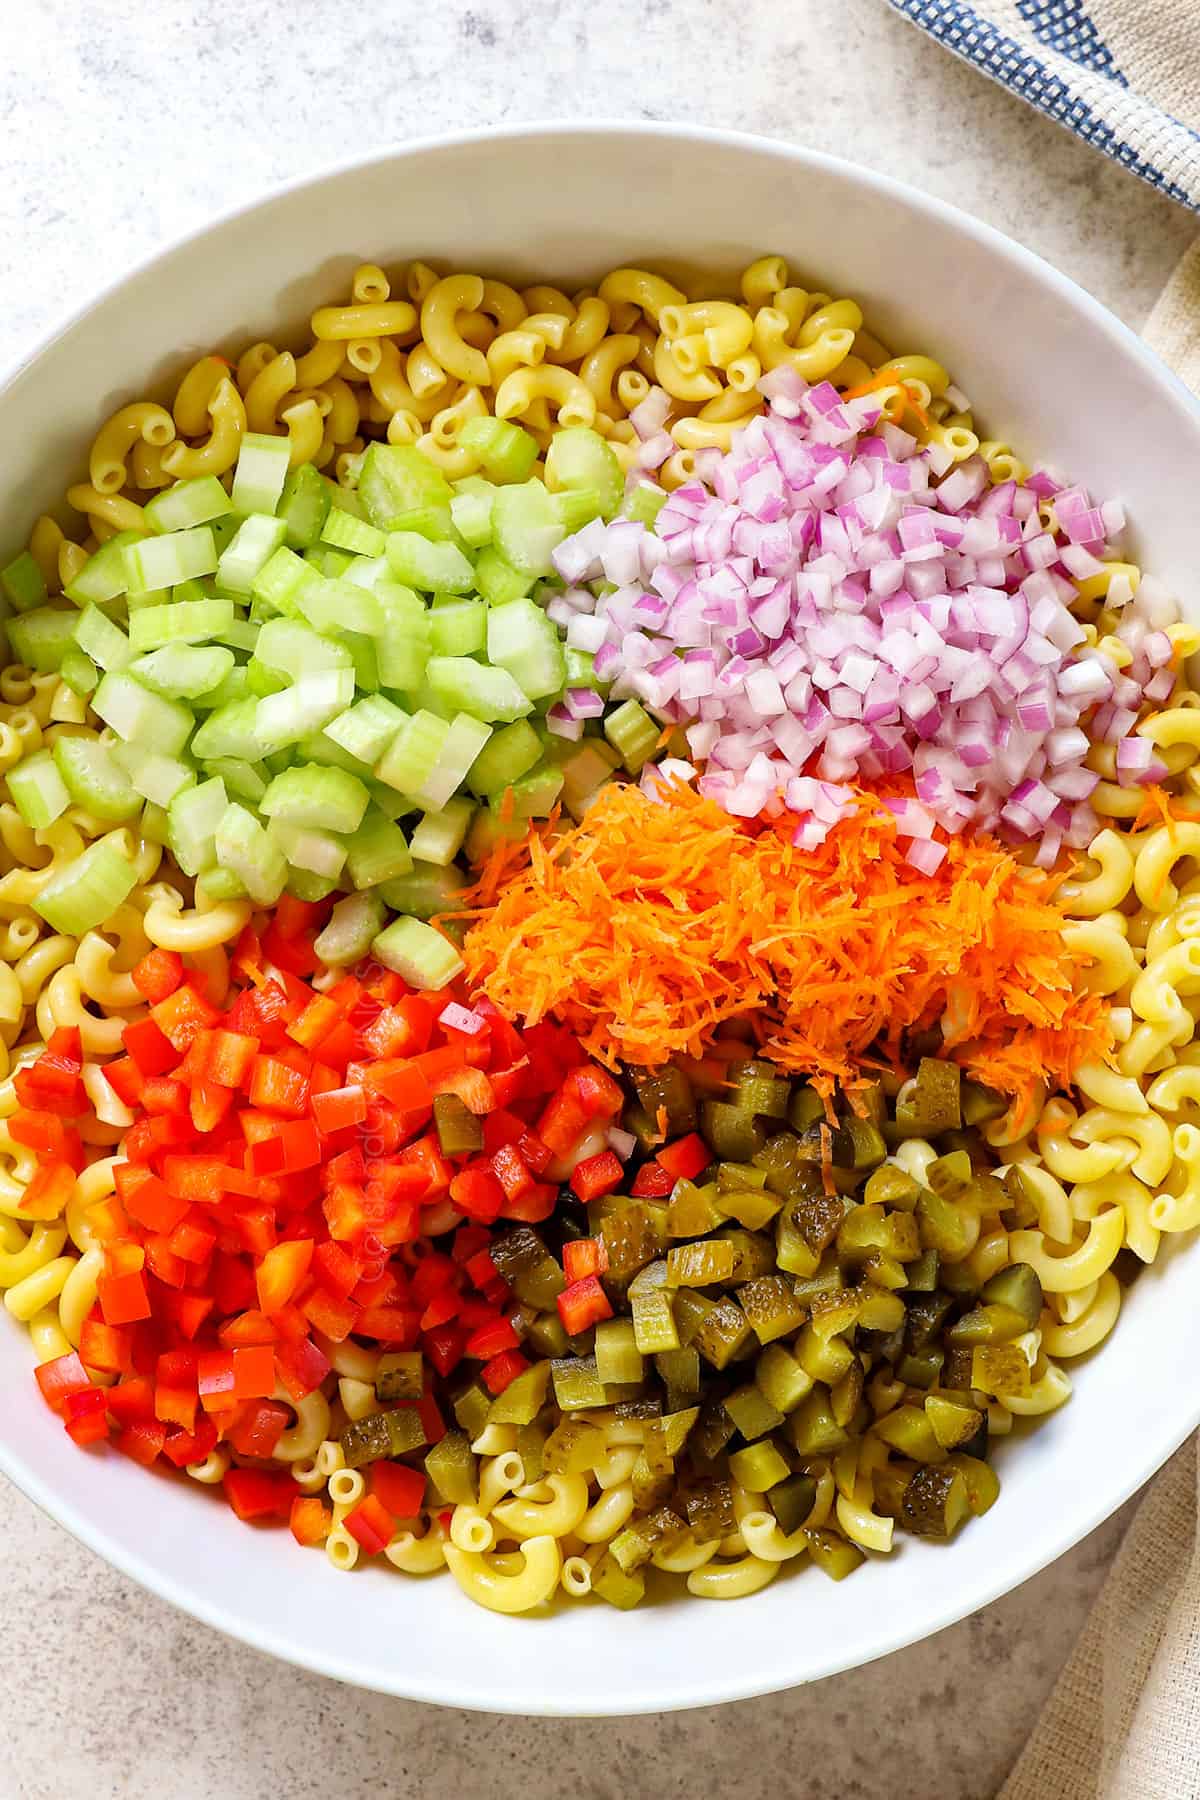 top view showing ingredients of macaroni salad recipe in a bowl:  macaroni, celery, red onions, pickles, shredded carrots